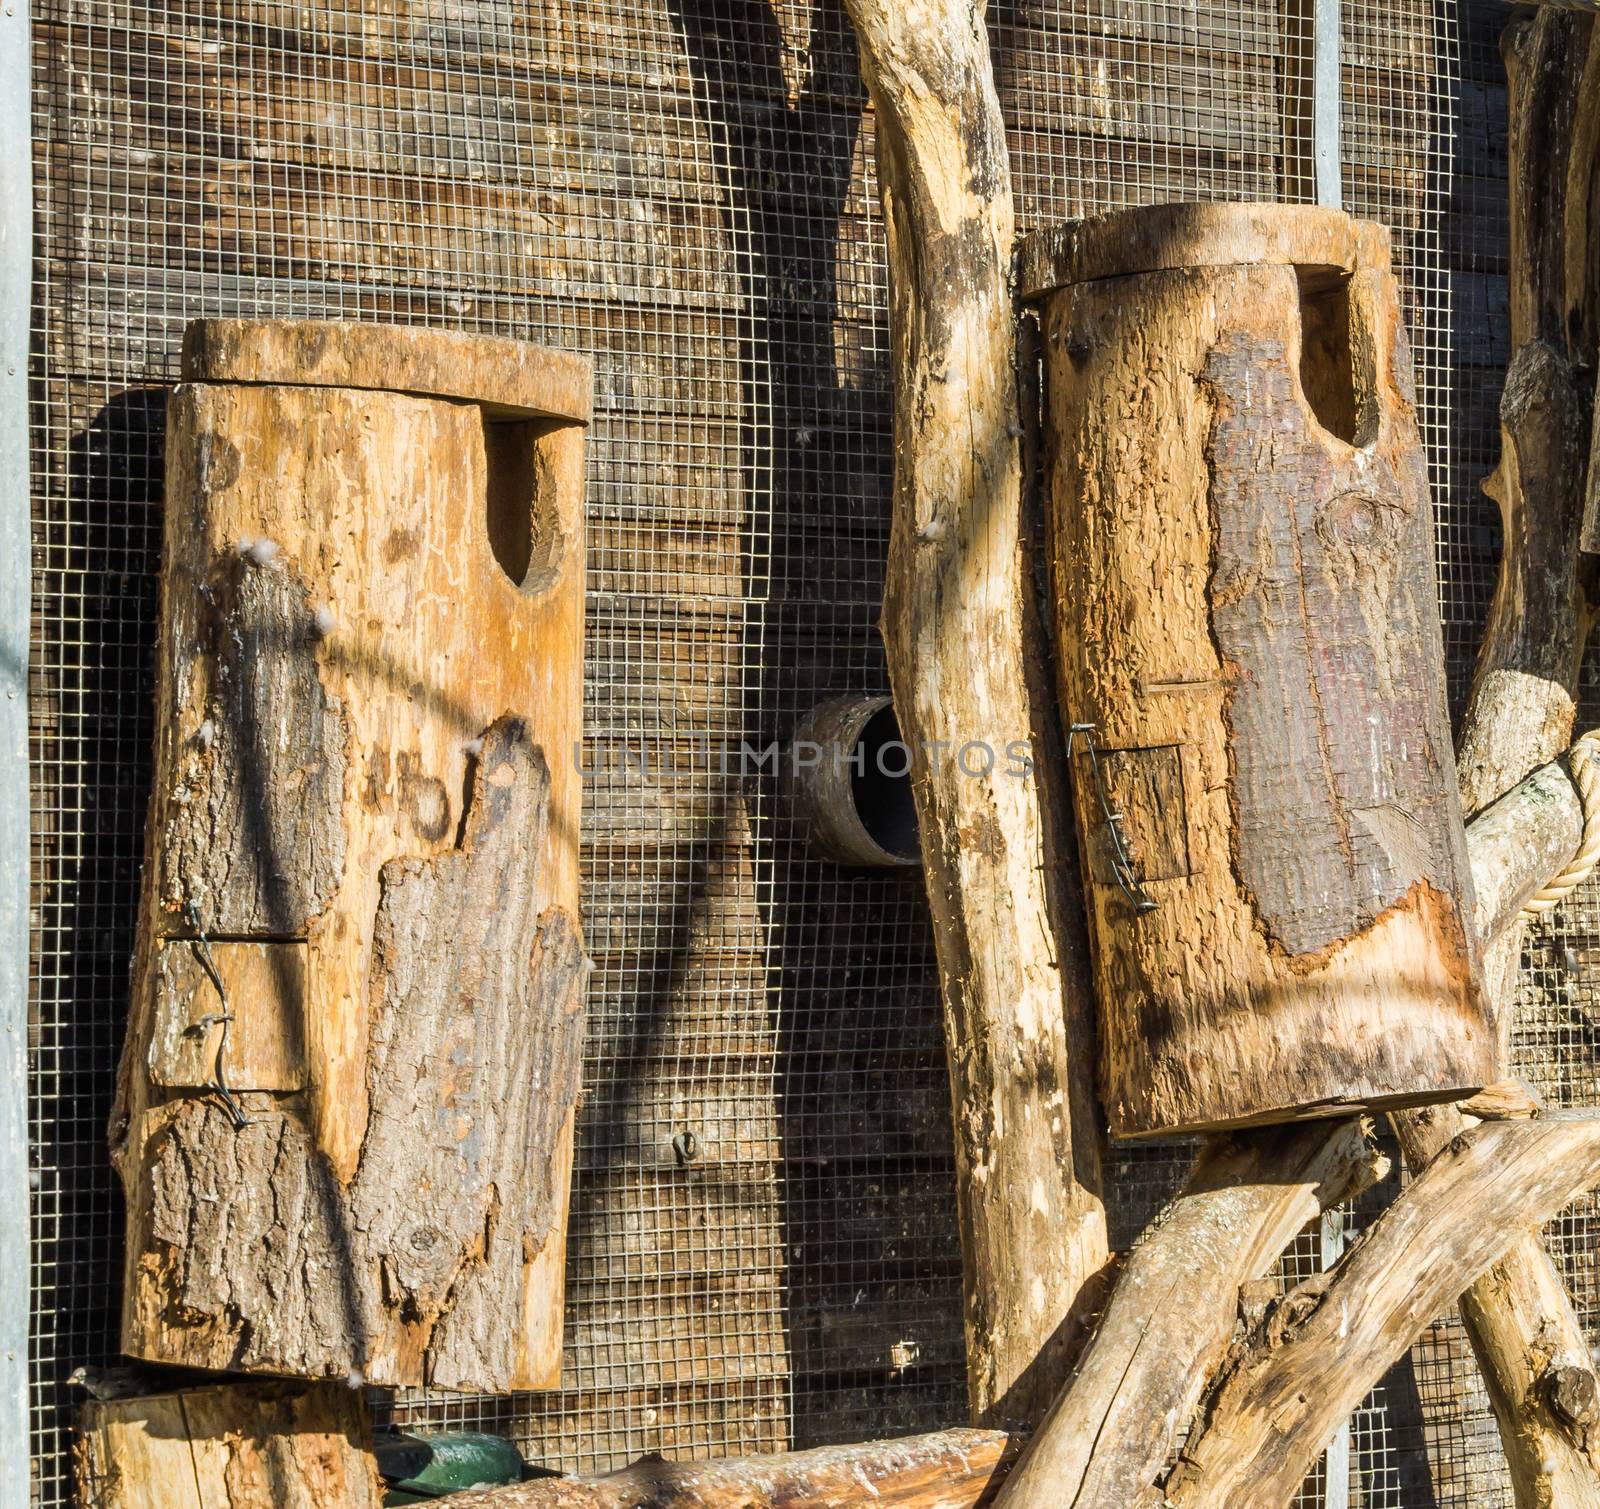 big hand crafted empty wooden bird houses made of a tree trunk and wood hanging on the wall